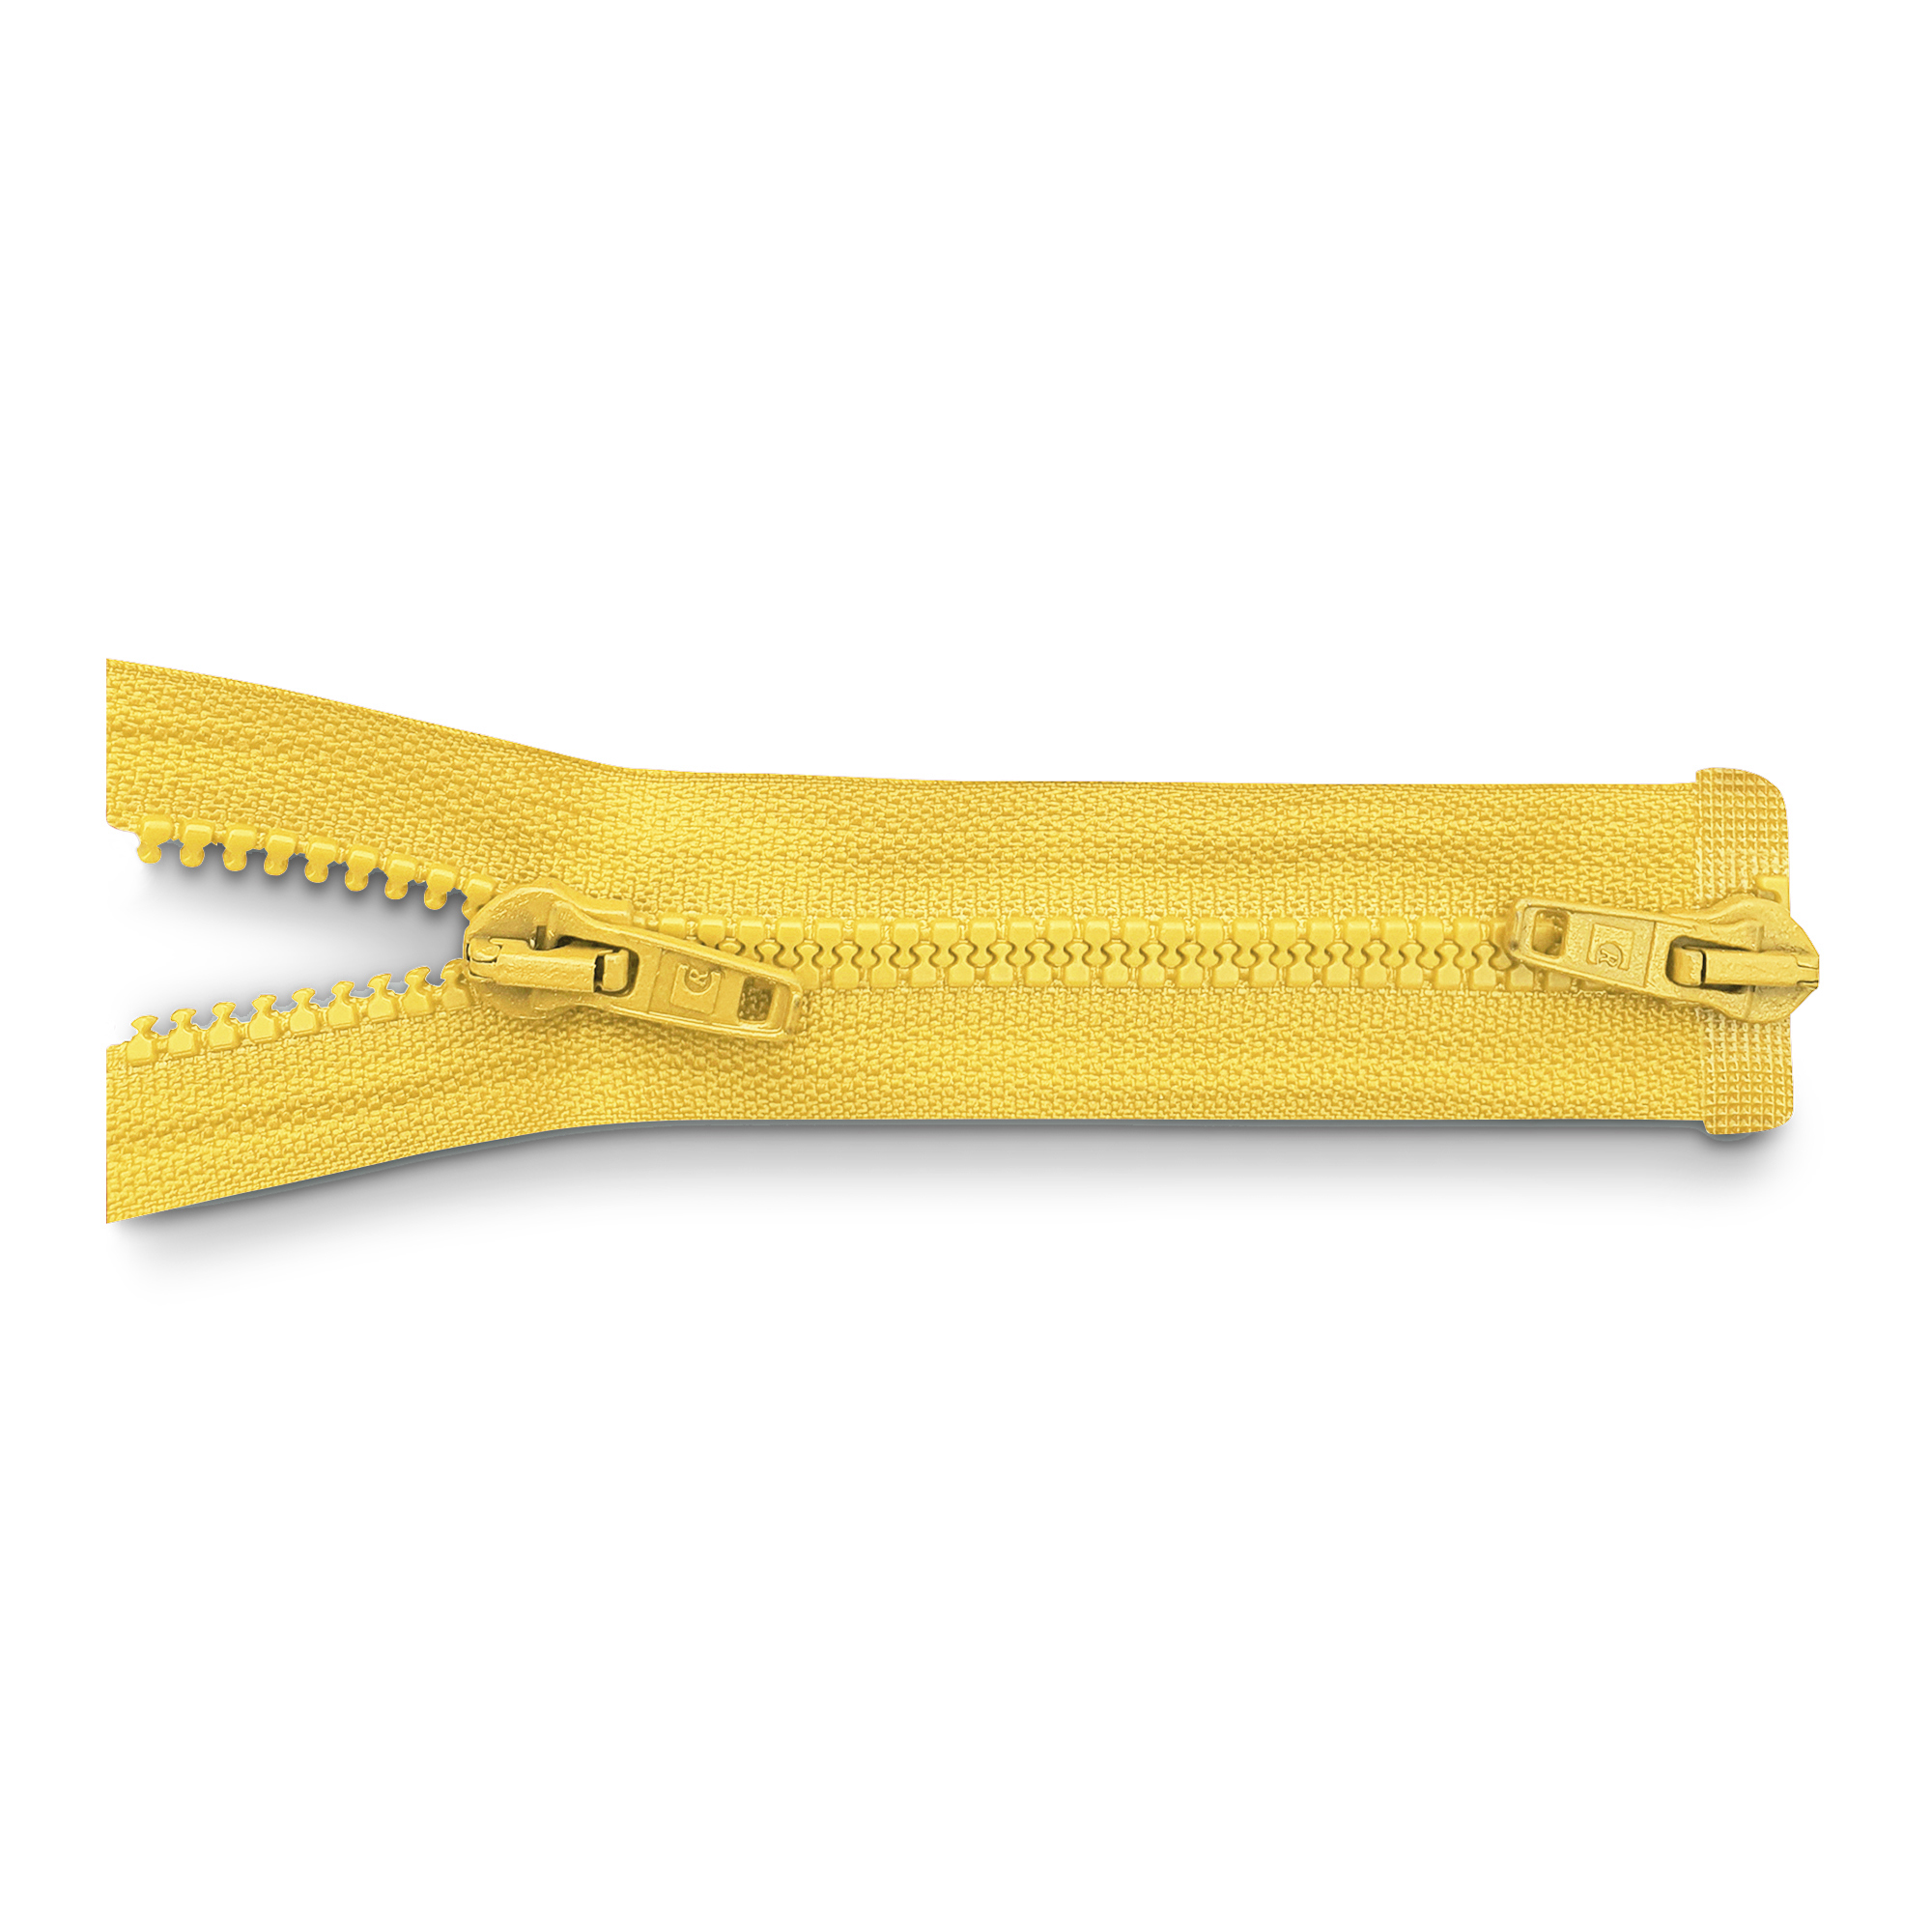 zipper 100cm, divisible, 2way, molded plastic, wide, canary